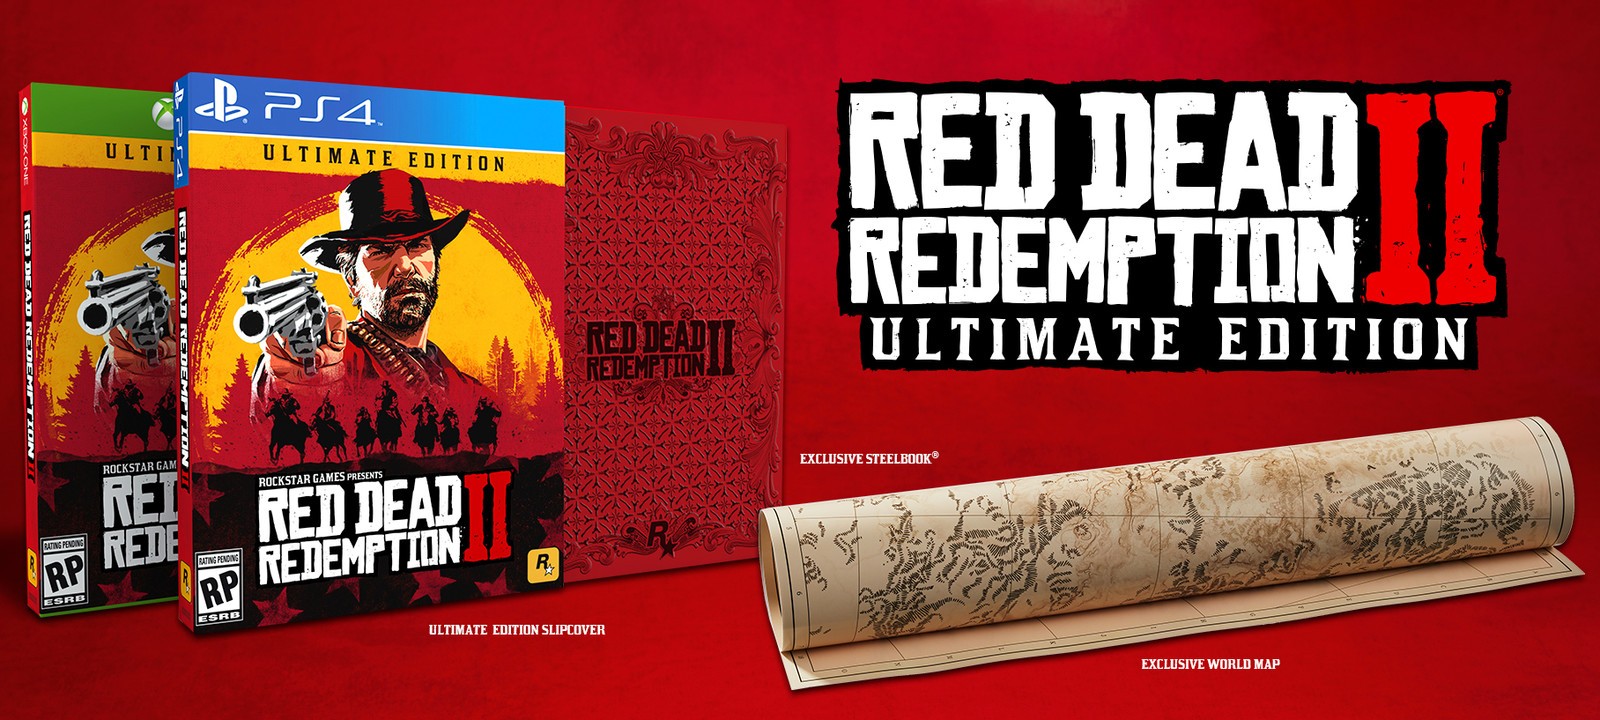 Red Dead Redemption 2 Ultimate Edition Gamempire It